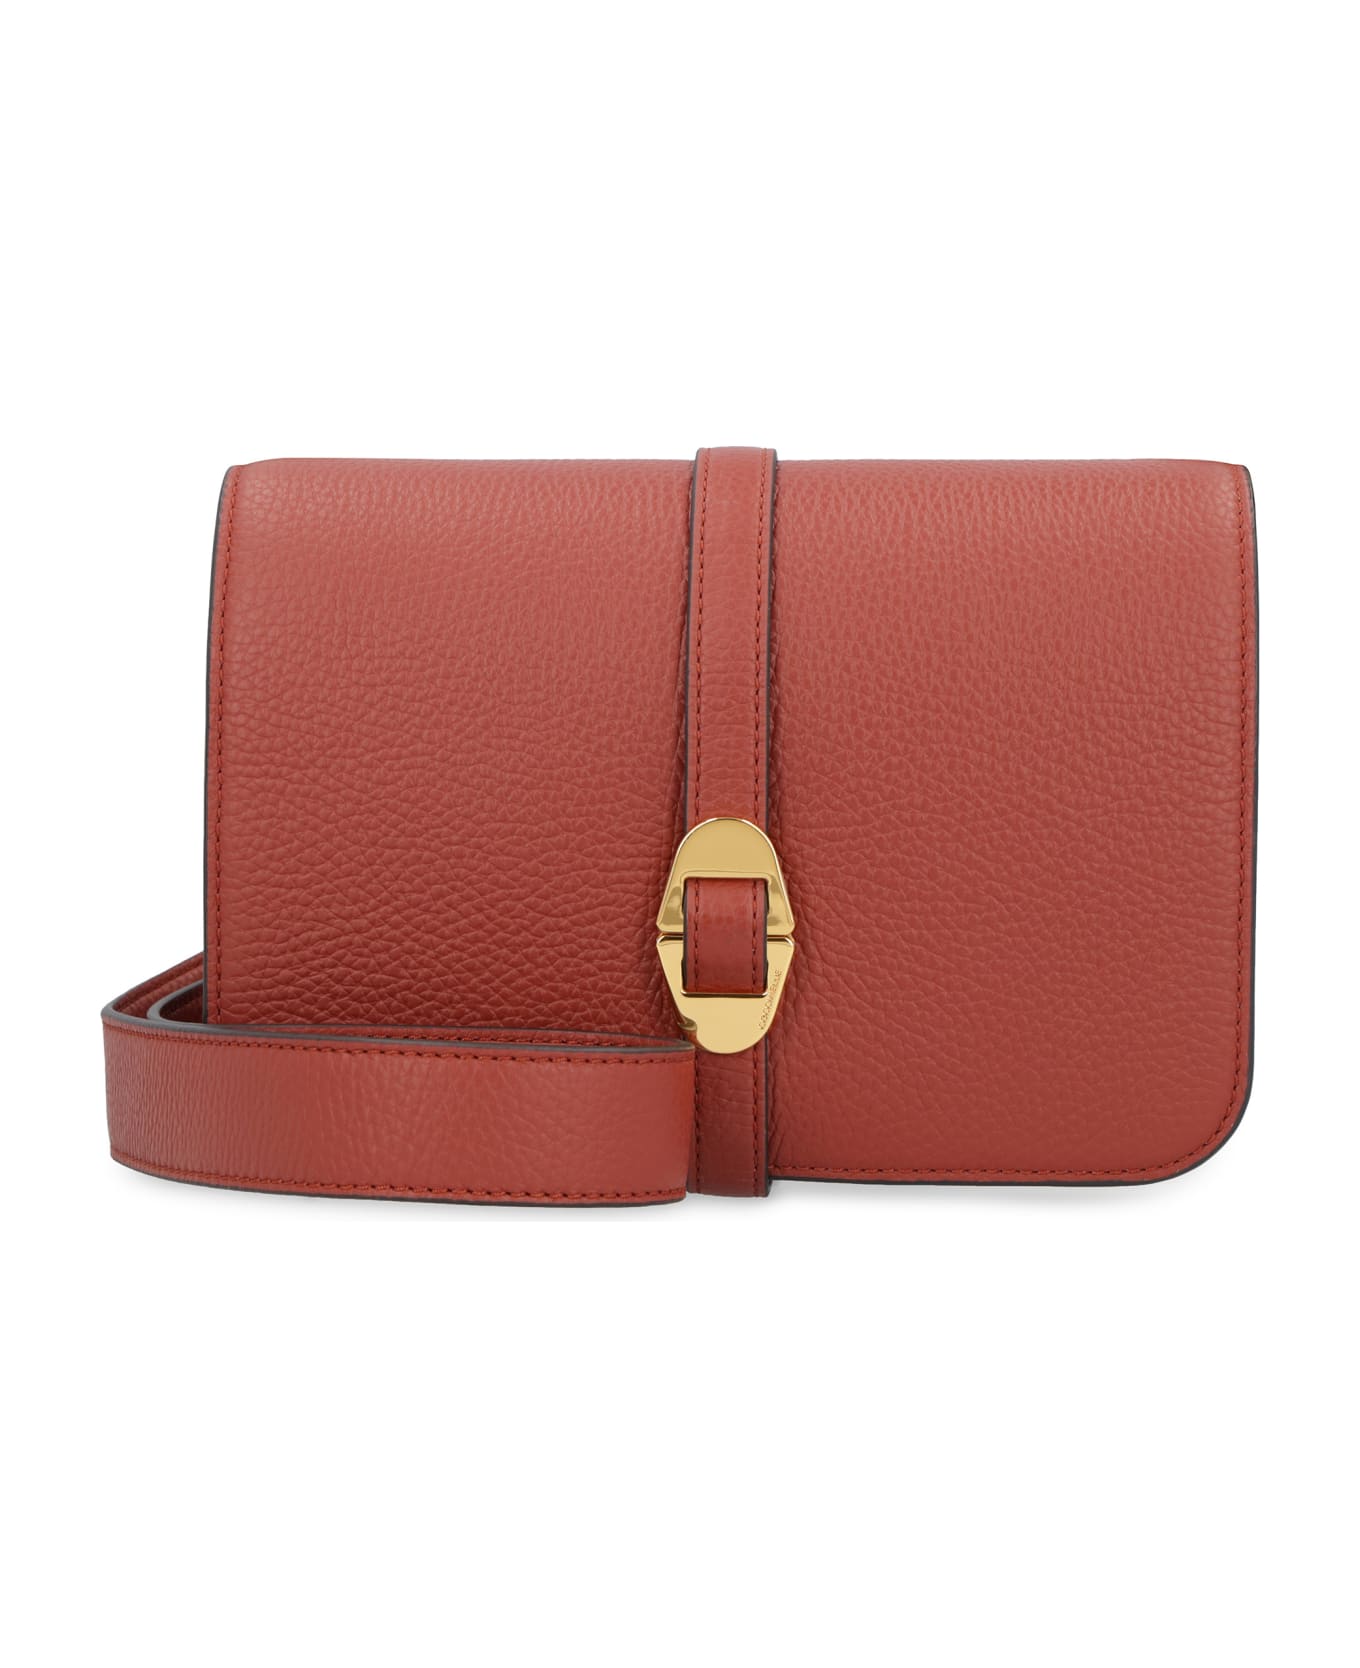 Coccinelle Cosima Leather Crossbody Bag - red